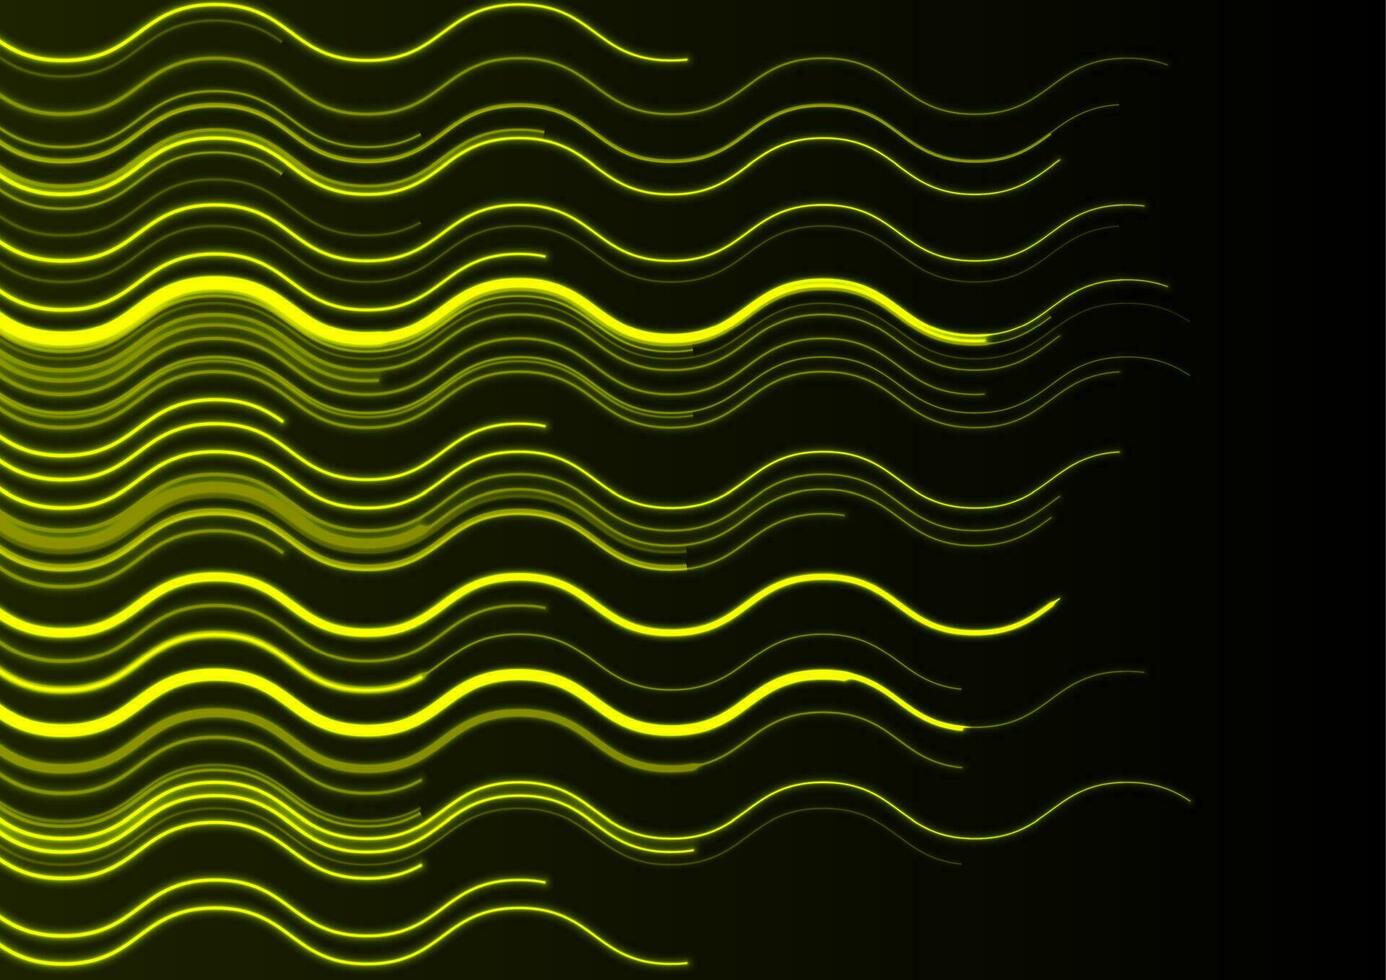 Bright yellow neon wavy lines abstract tech background vector